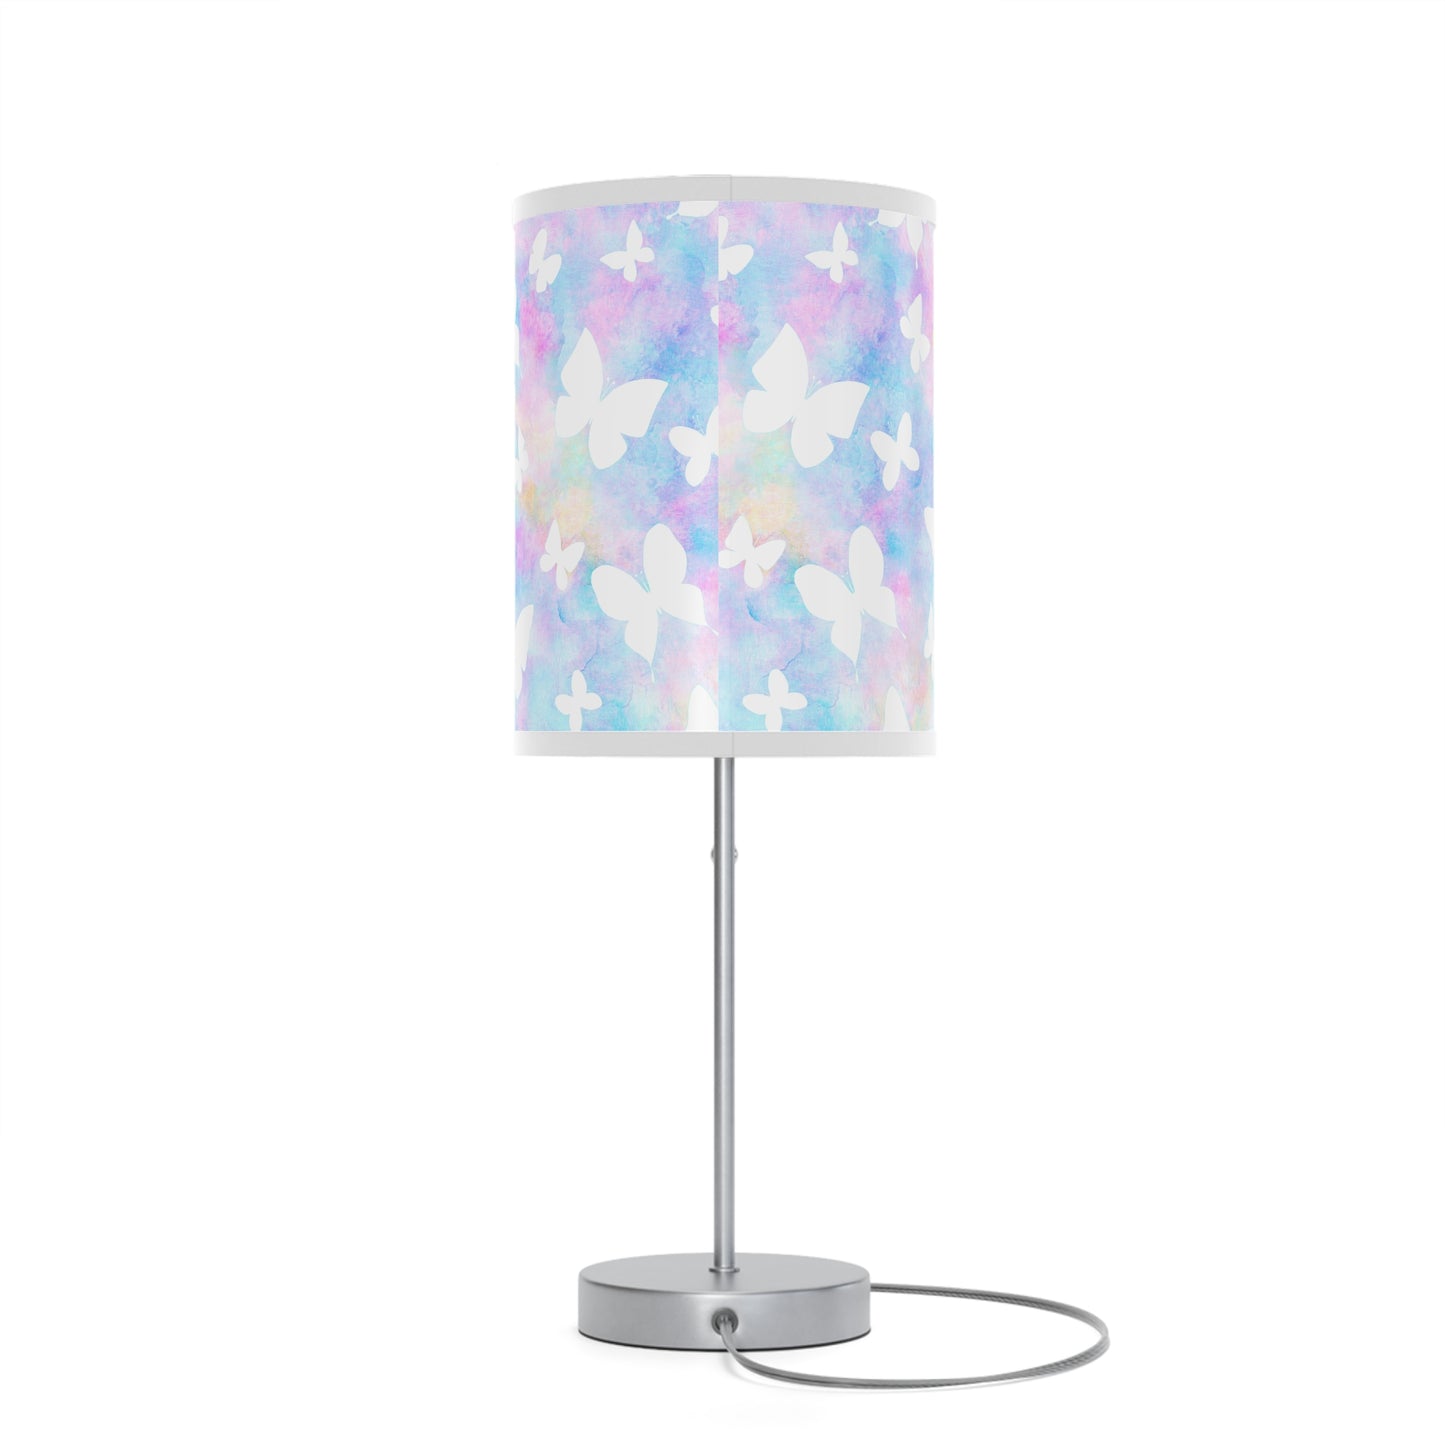 Pastel Butterflies Lamp on a Stand, US|CA plug, Steel Lamp Base with Silver or White Classy Finish, Choose Your Color Trim